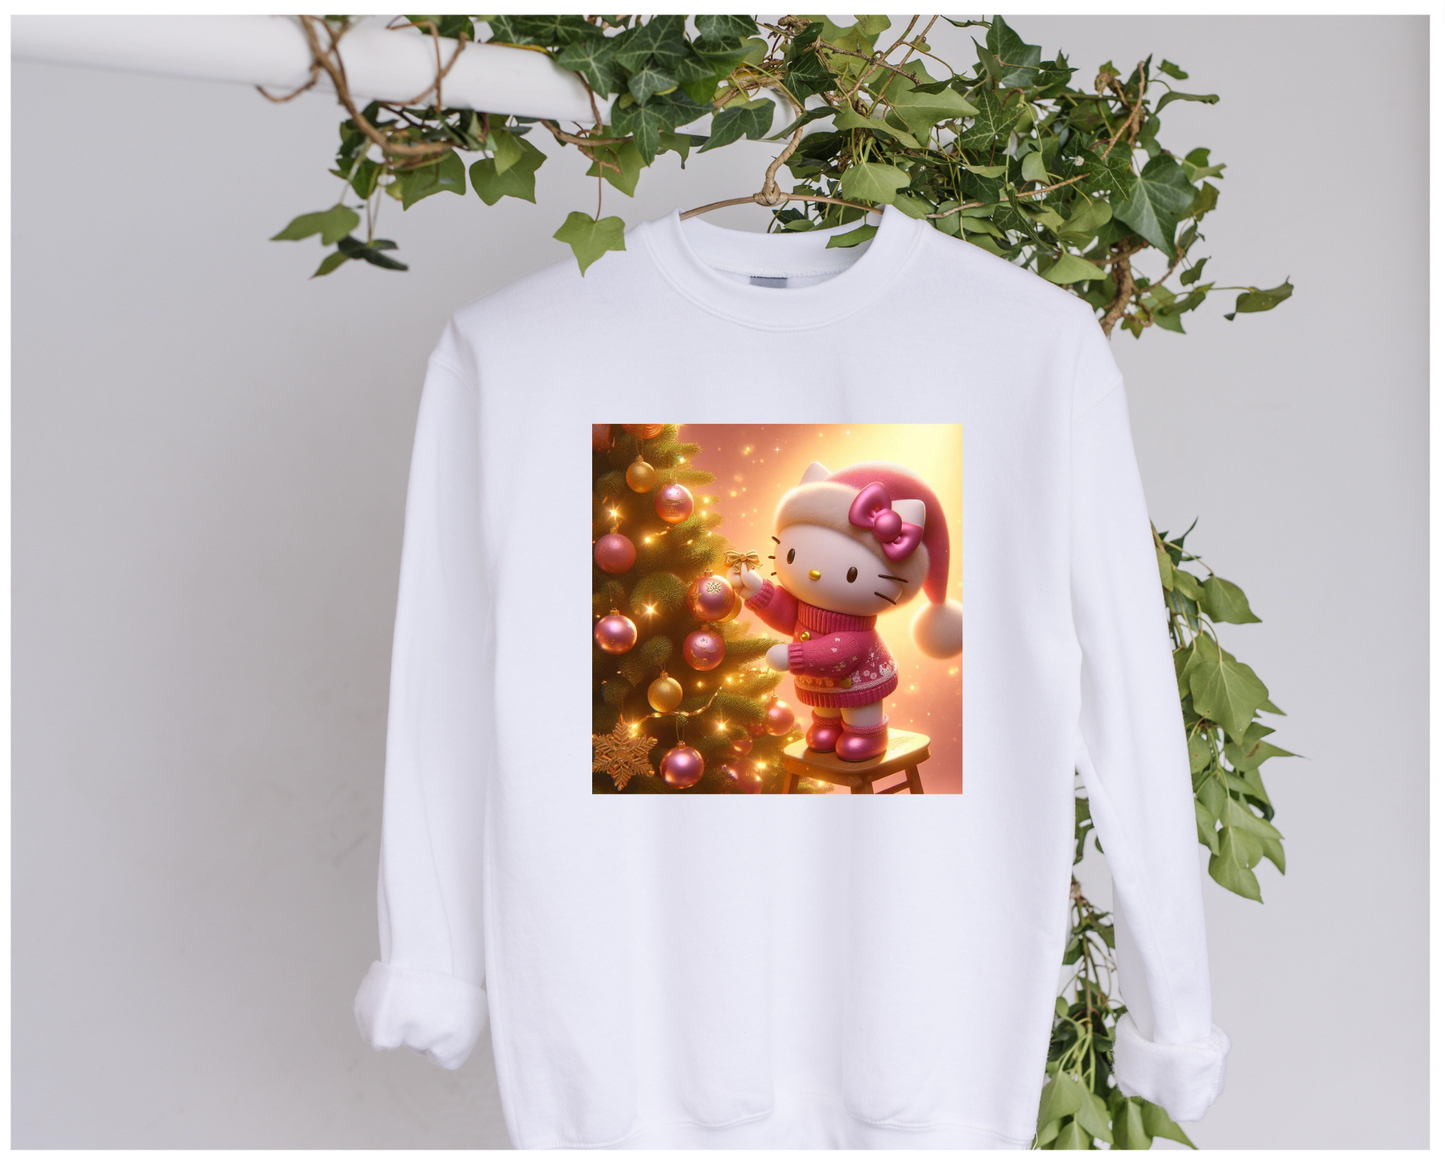 DTF Kitty Putting up Christmas Tree Clothing Designs